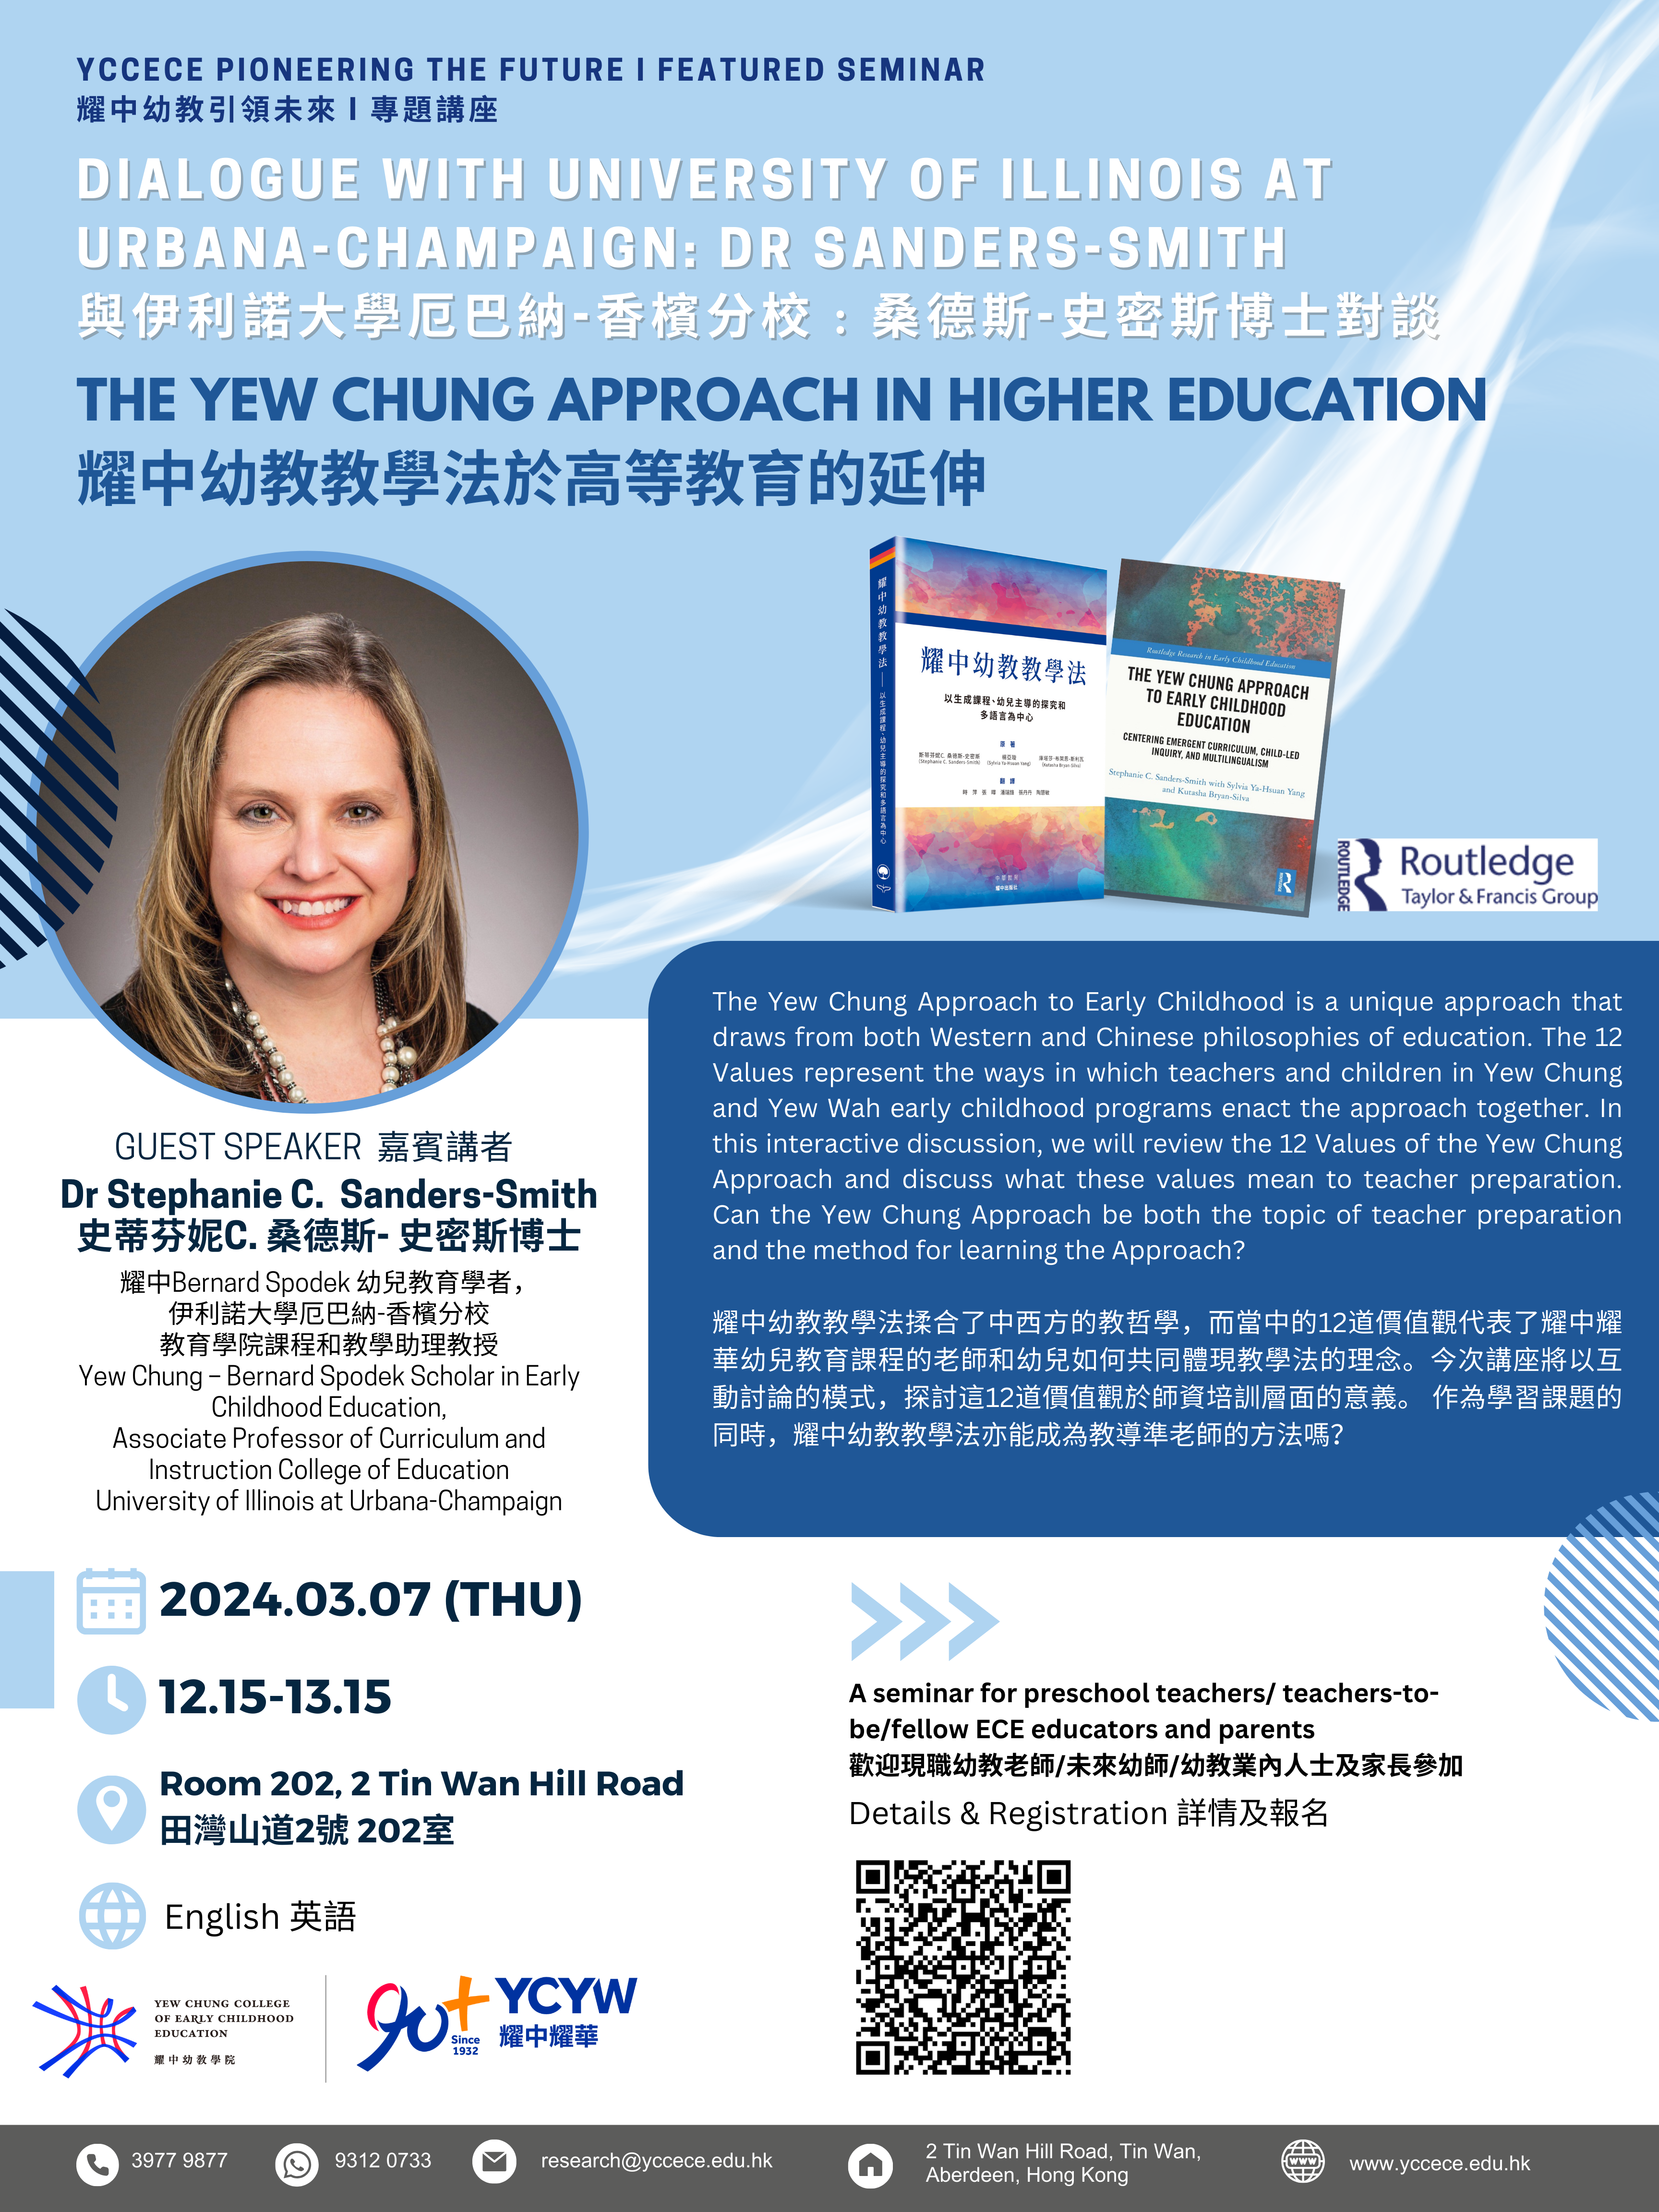 Featured Talk on The Yew Chung Approach in Higher Education